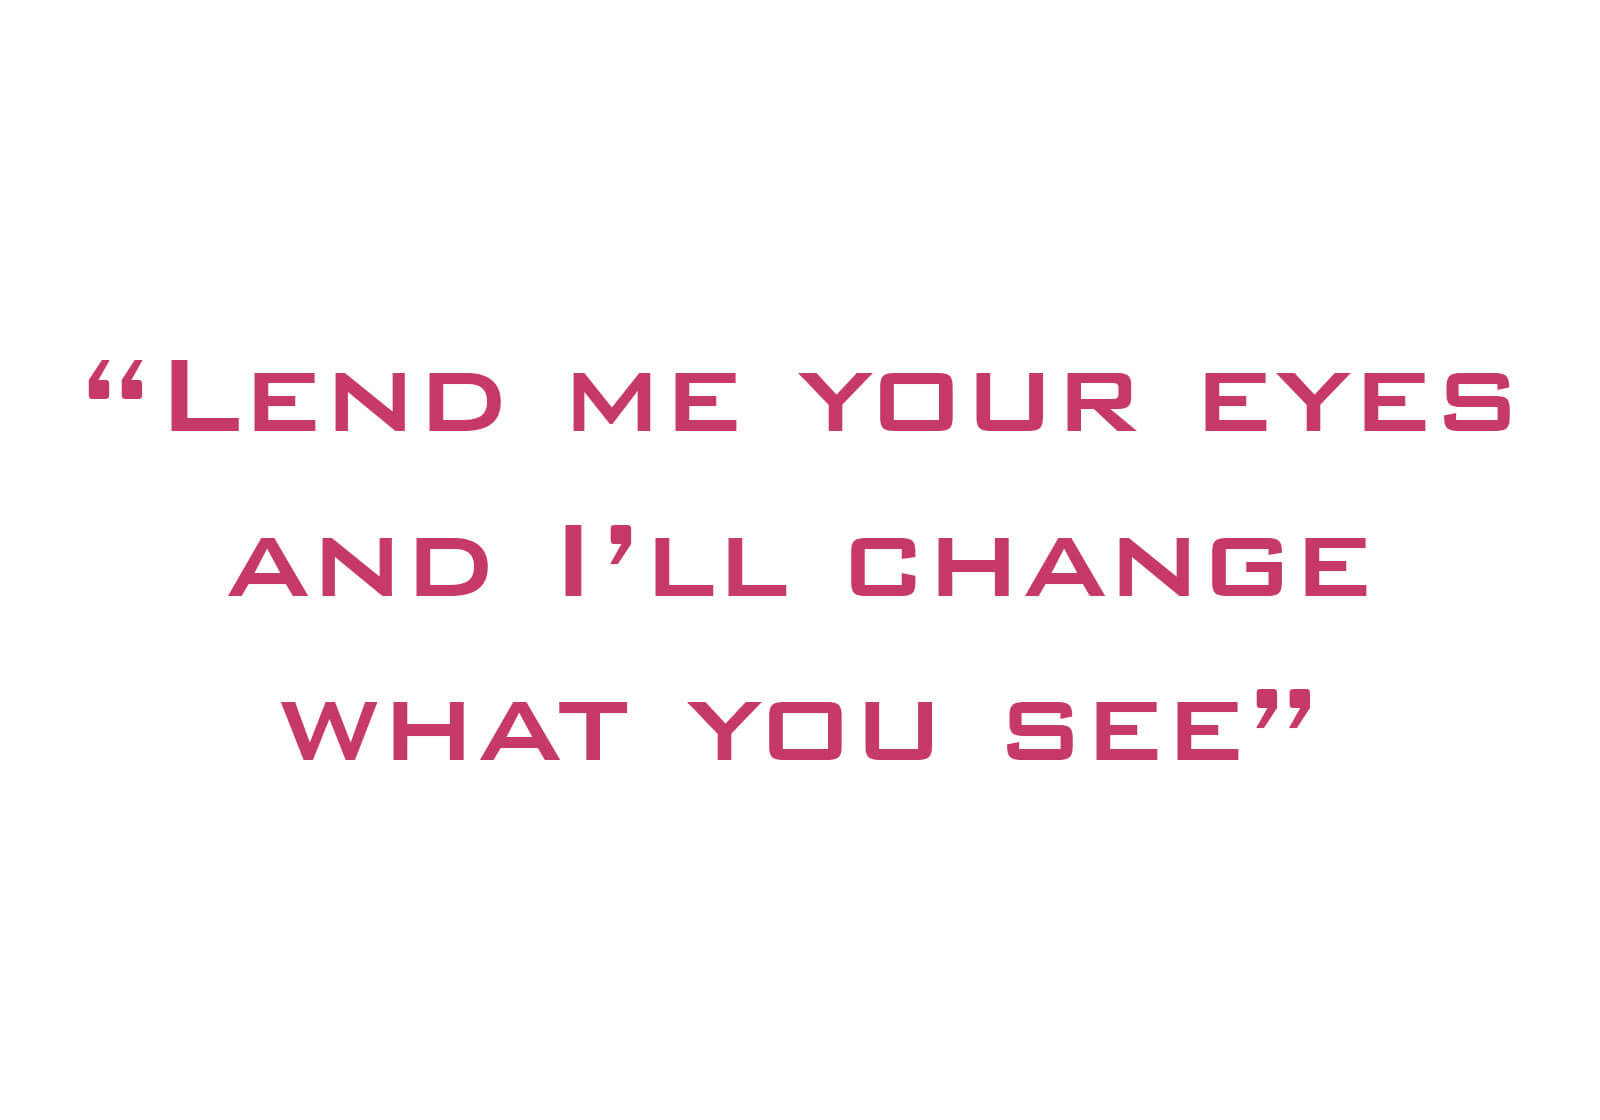 Lend me your eyes and I'll change what you see